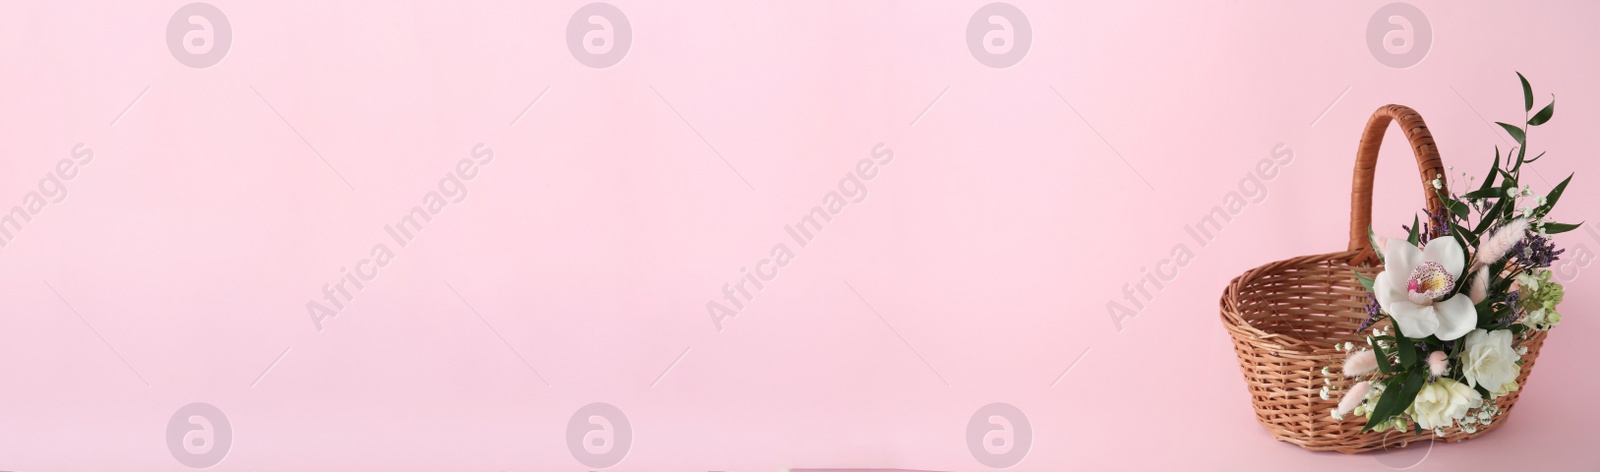 Photo of Wicker basket decorated with beautiful flowers on pink background, space for text. Easter item